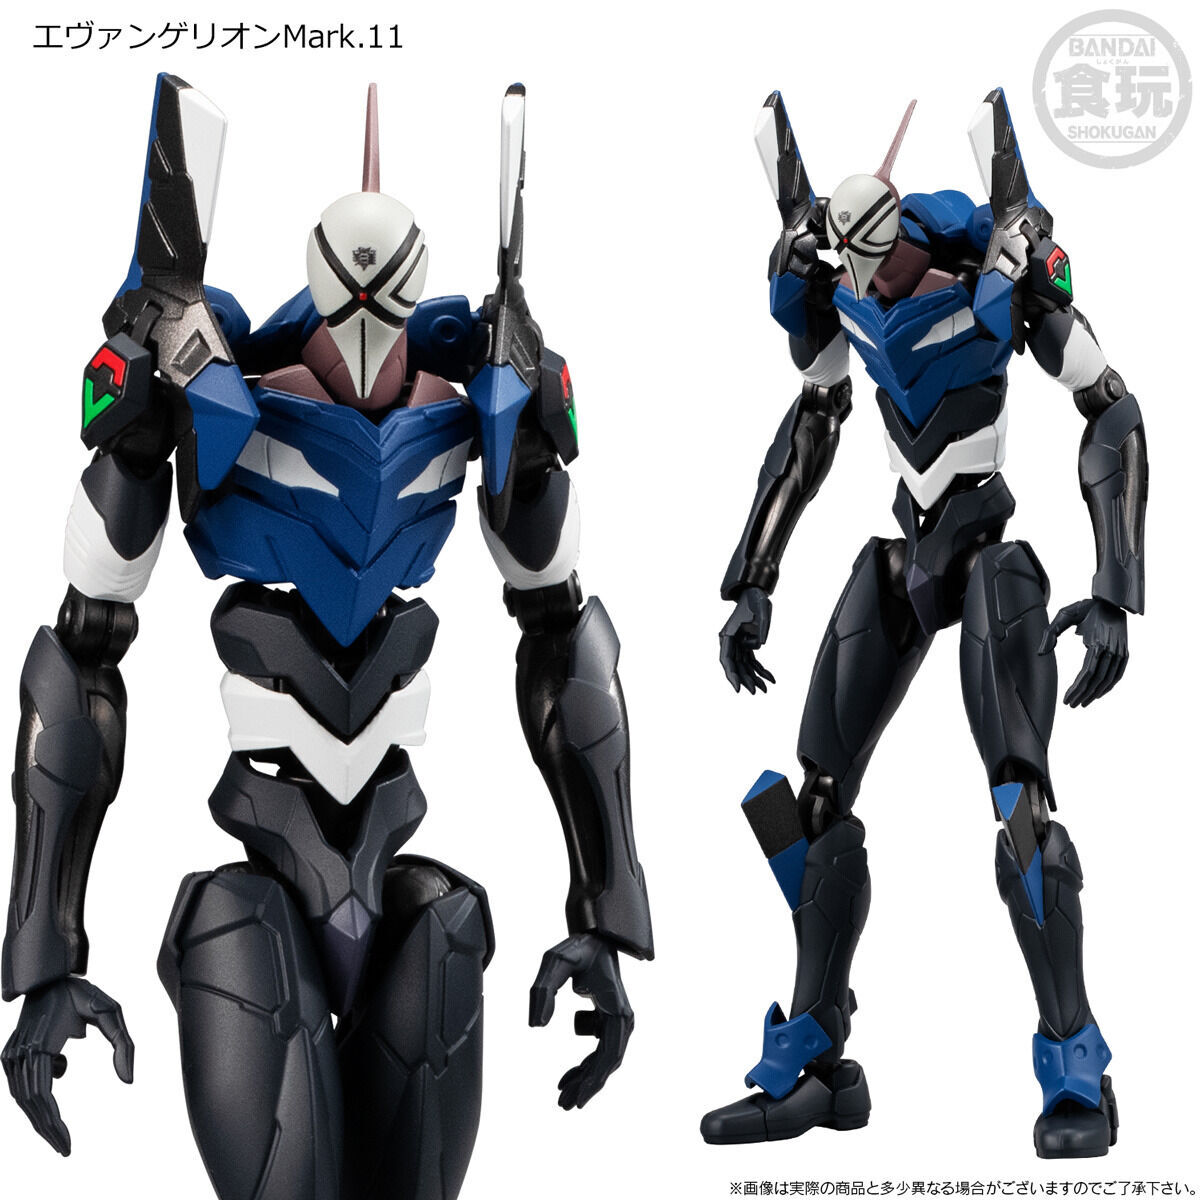 Evangelion Frame-New Theatrical Edition 04 Overlapping Set 2